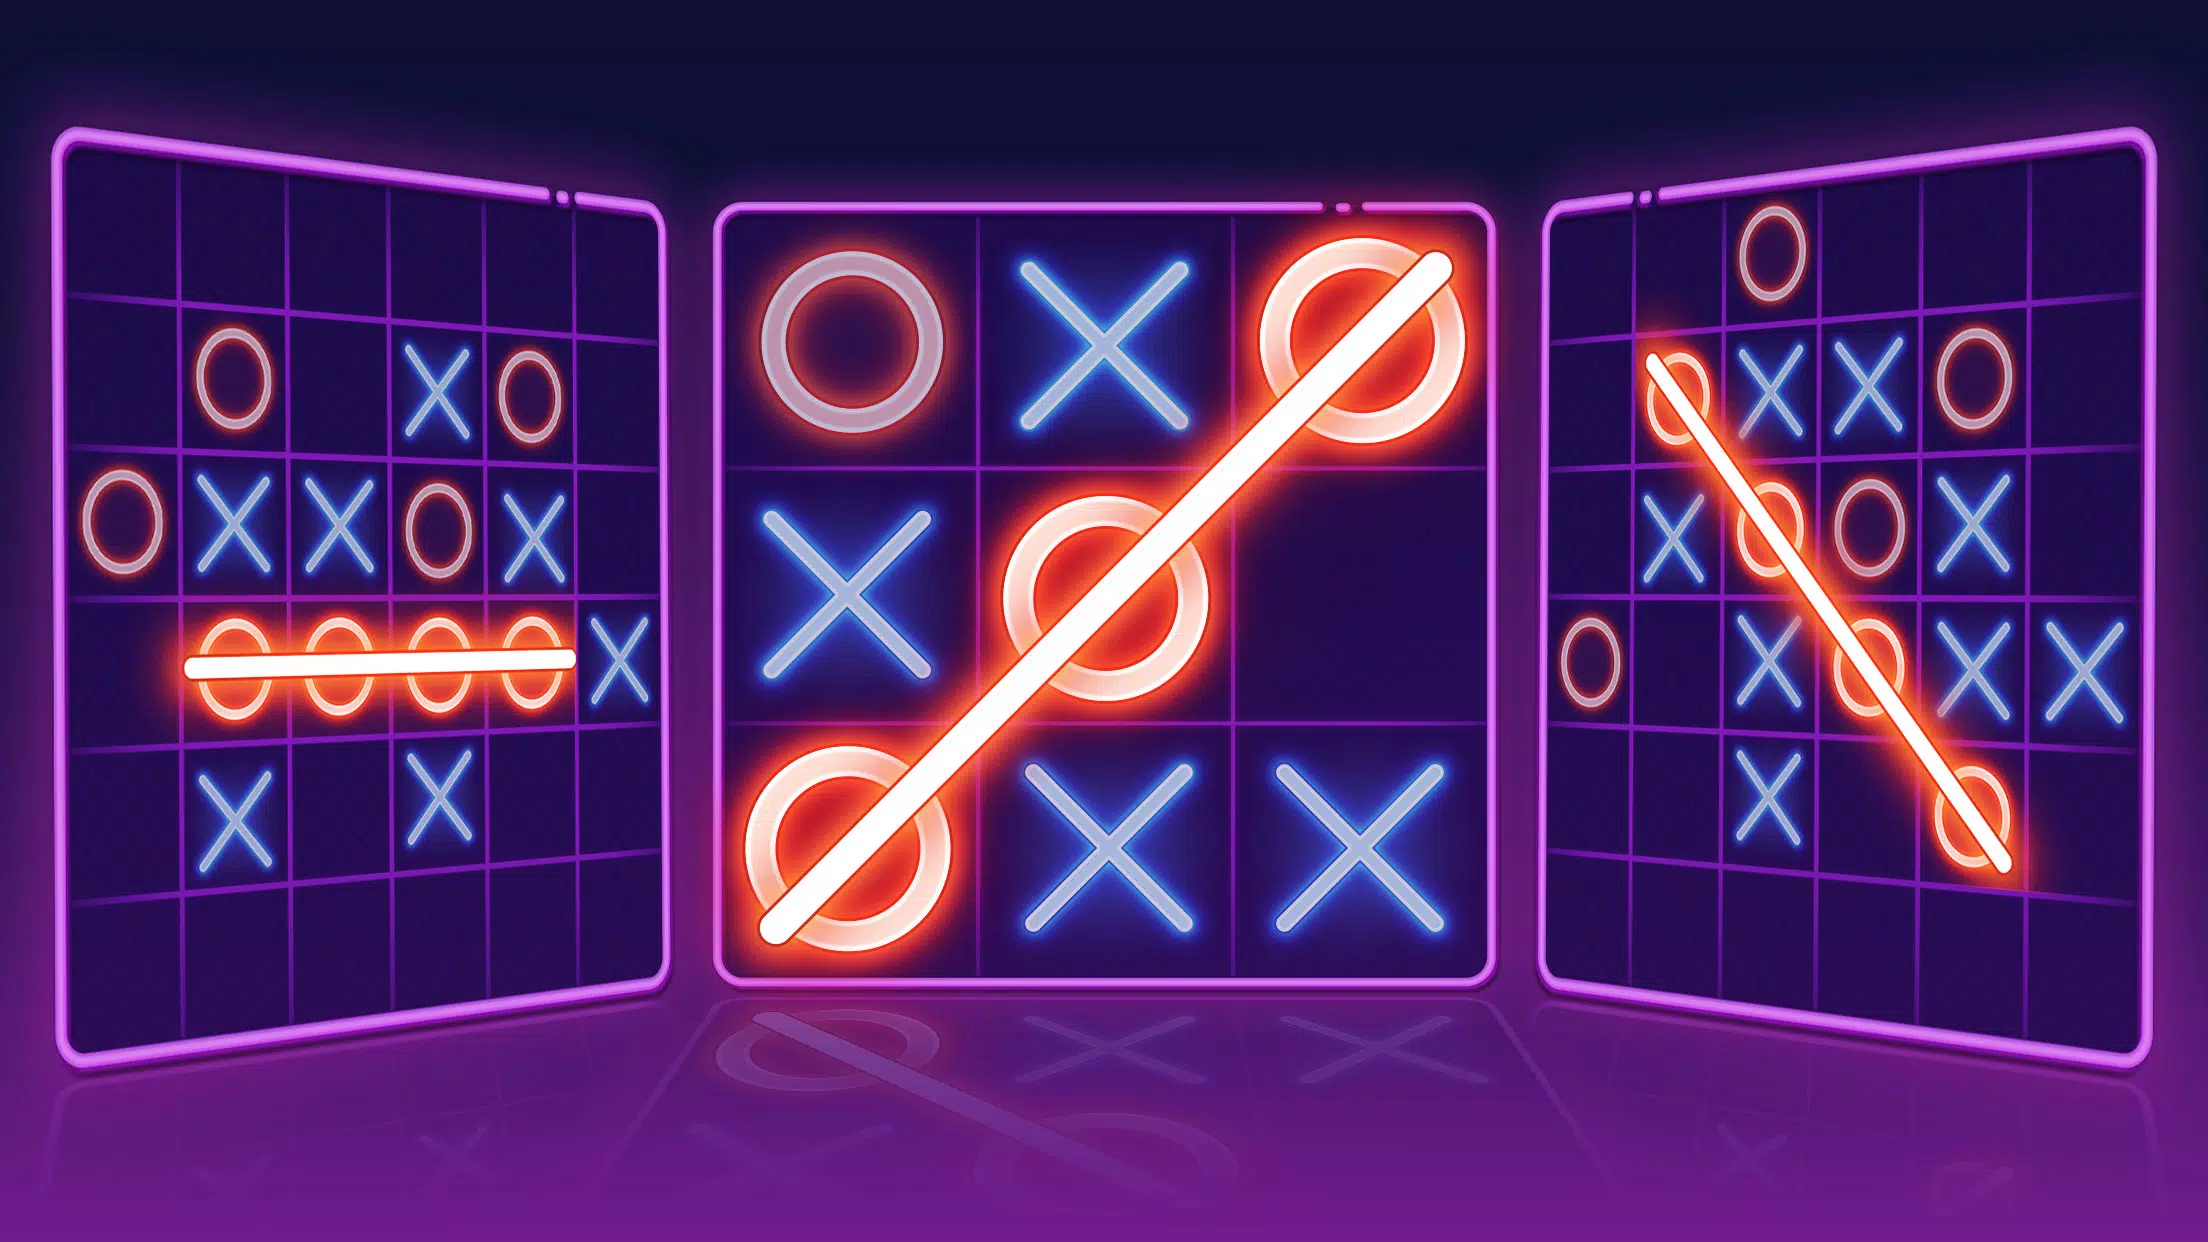 Download Tic Tac Toe 2 Player: XO Game on PC with MEmu